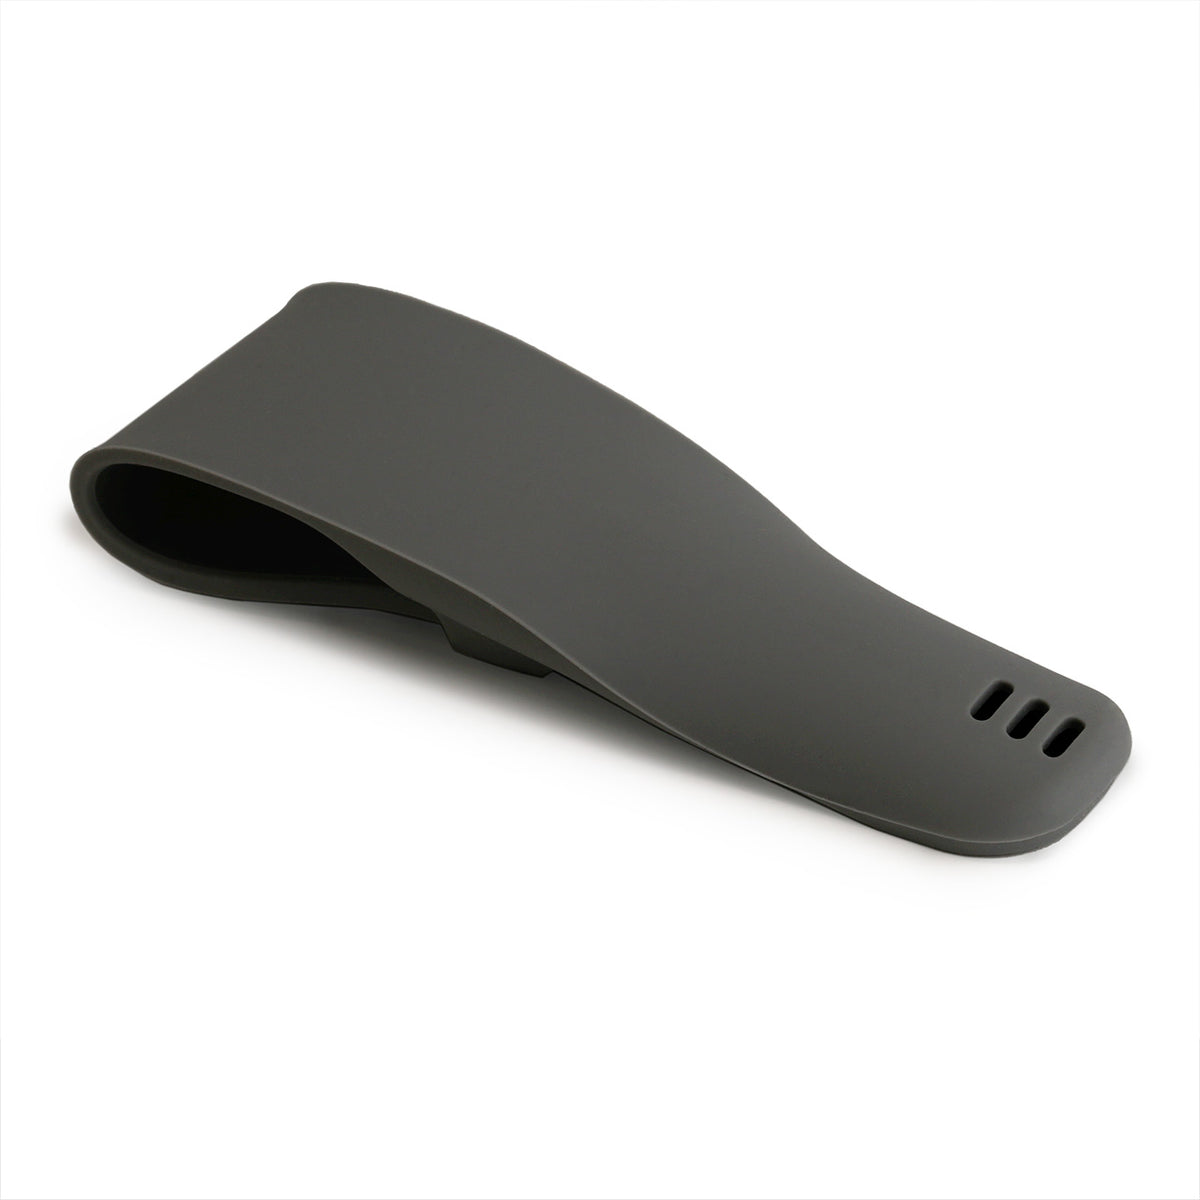 Back view of the dark grey silicone razor case showing the three airflow vents at the base